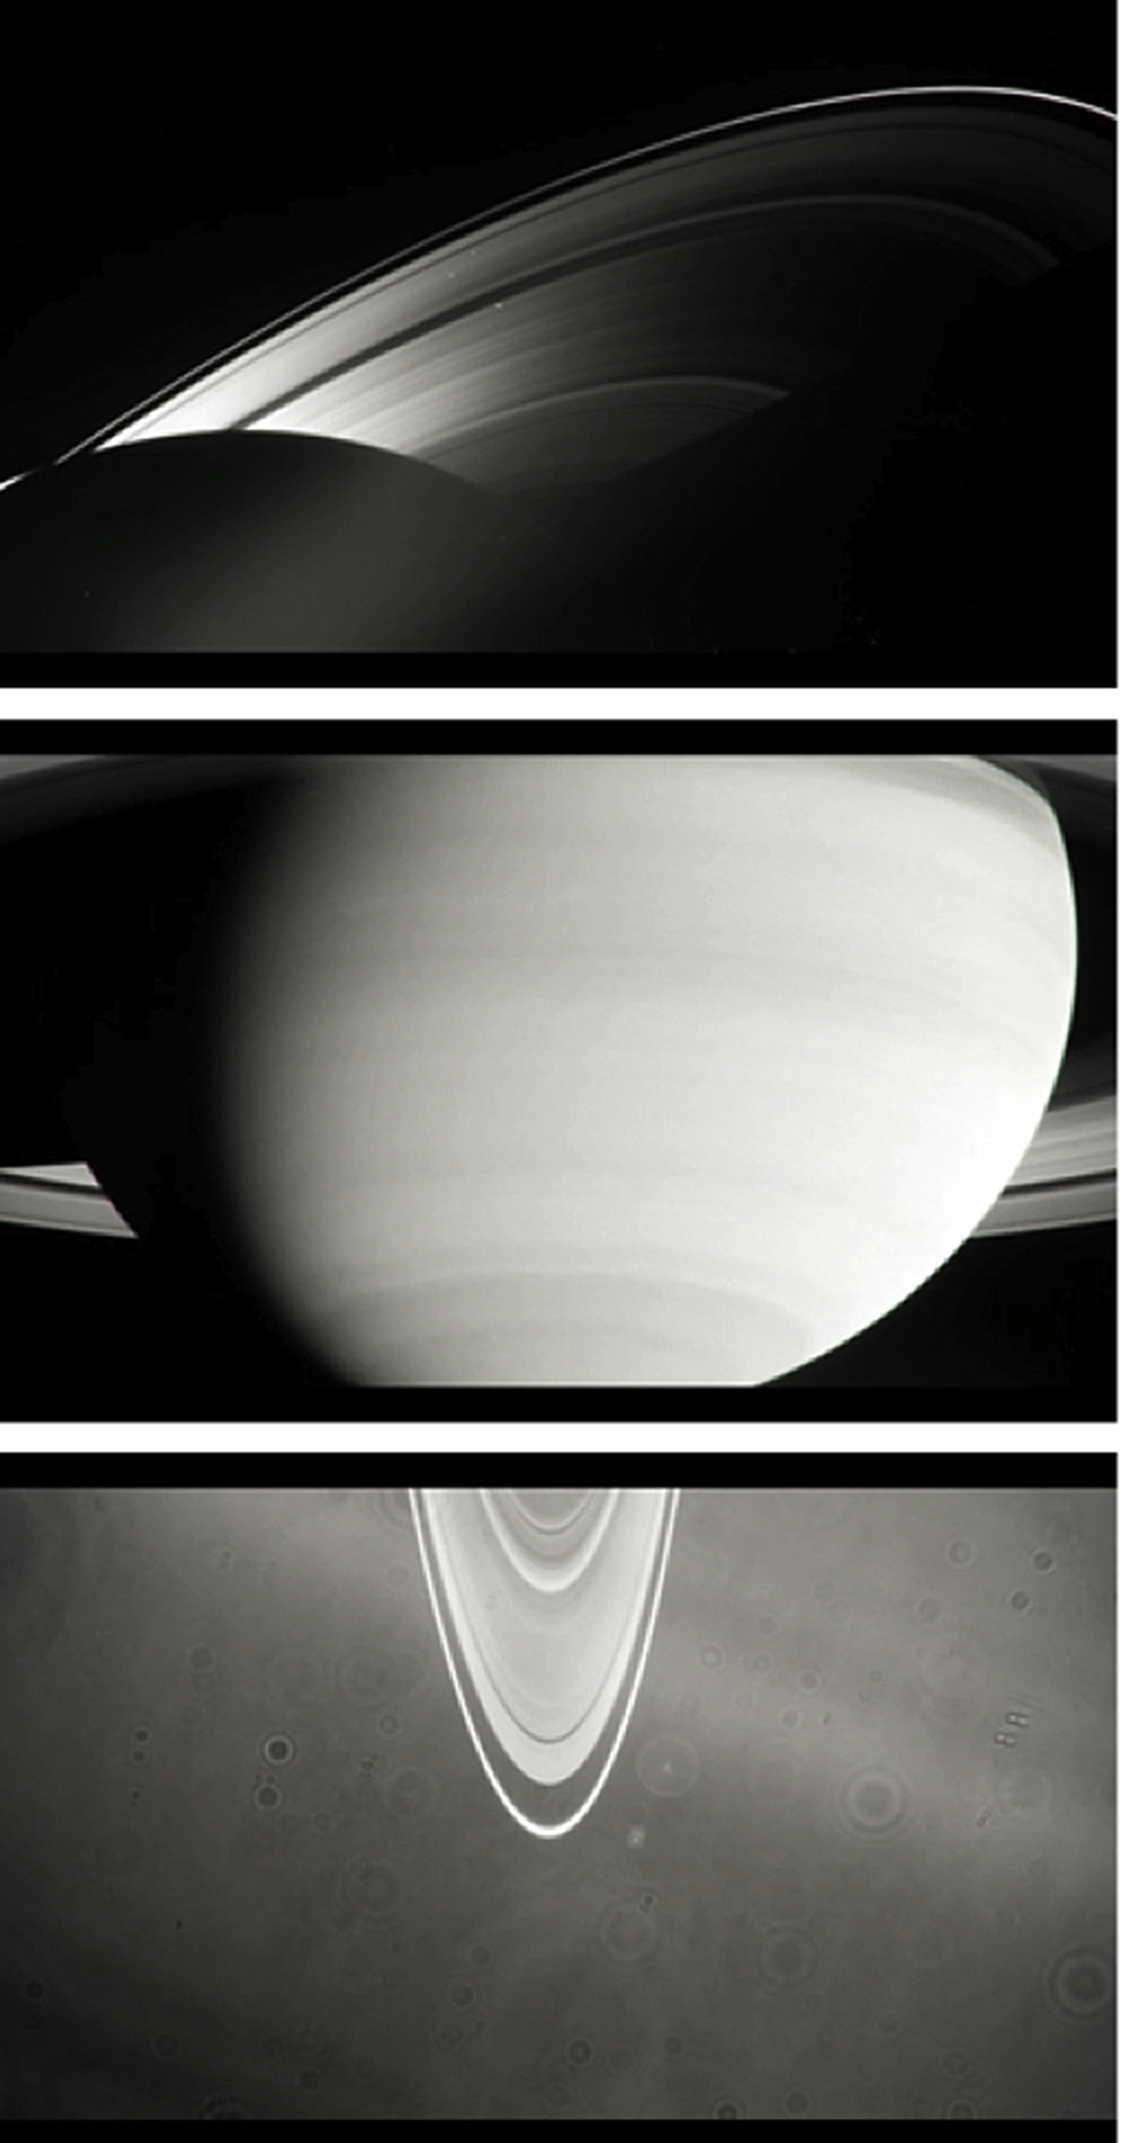  Solstice 2013 Stock footage from Cassini-Huygens Imaging Science Subsystem 00:03:45 3 + 1AP 